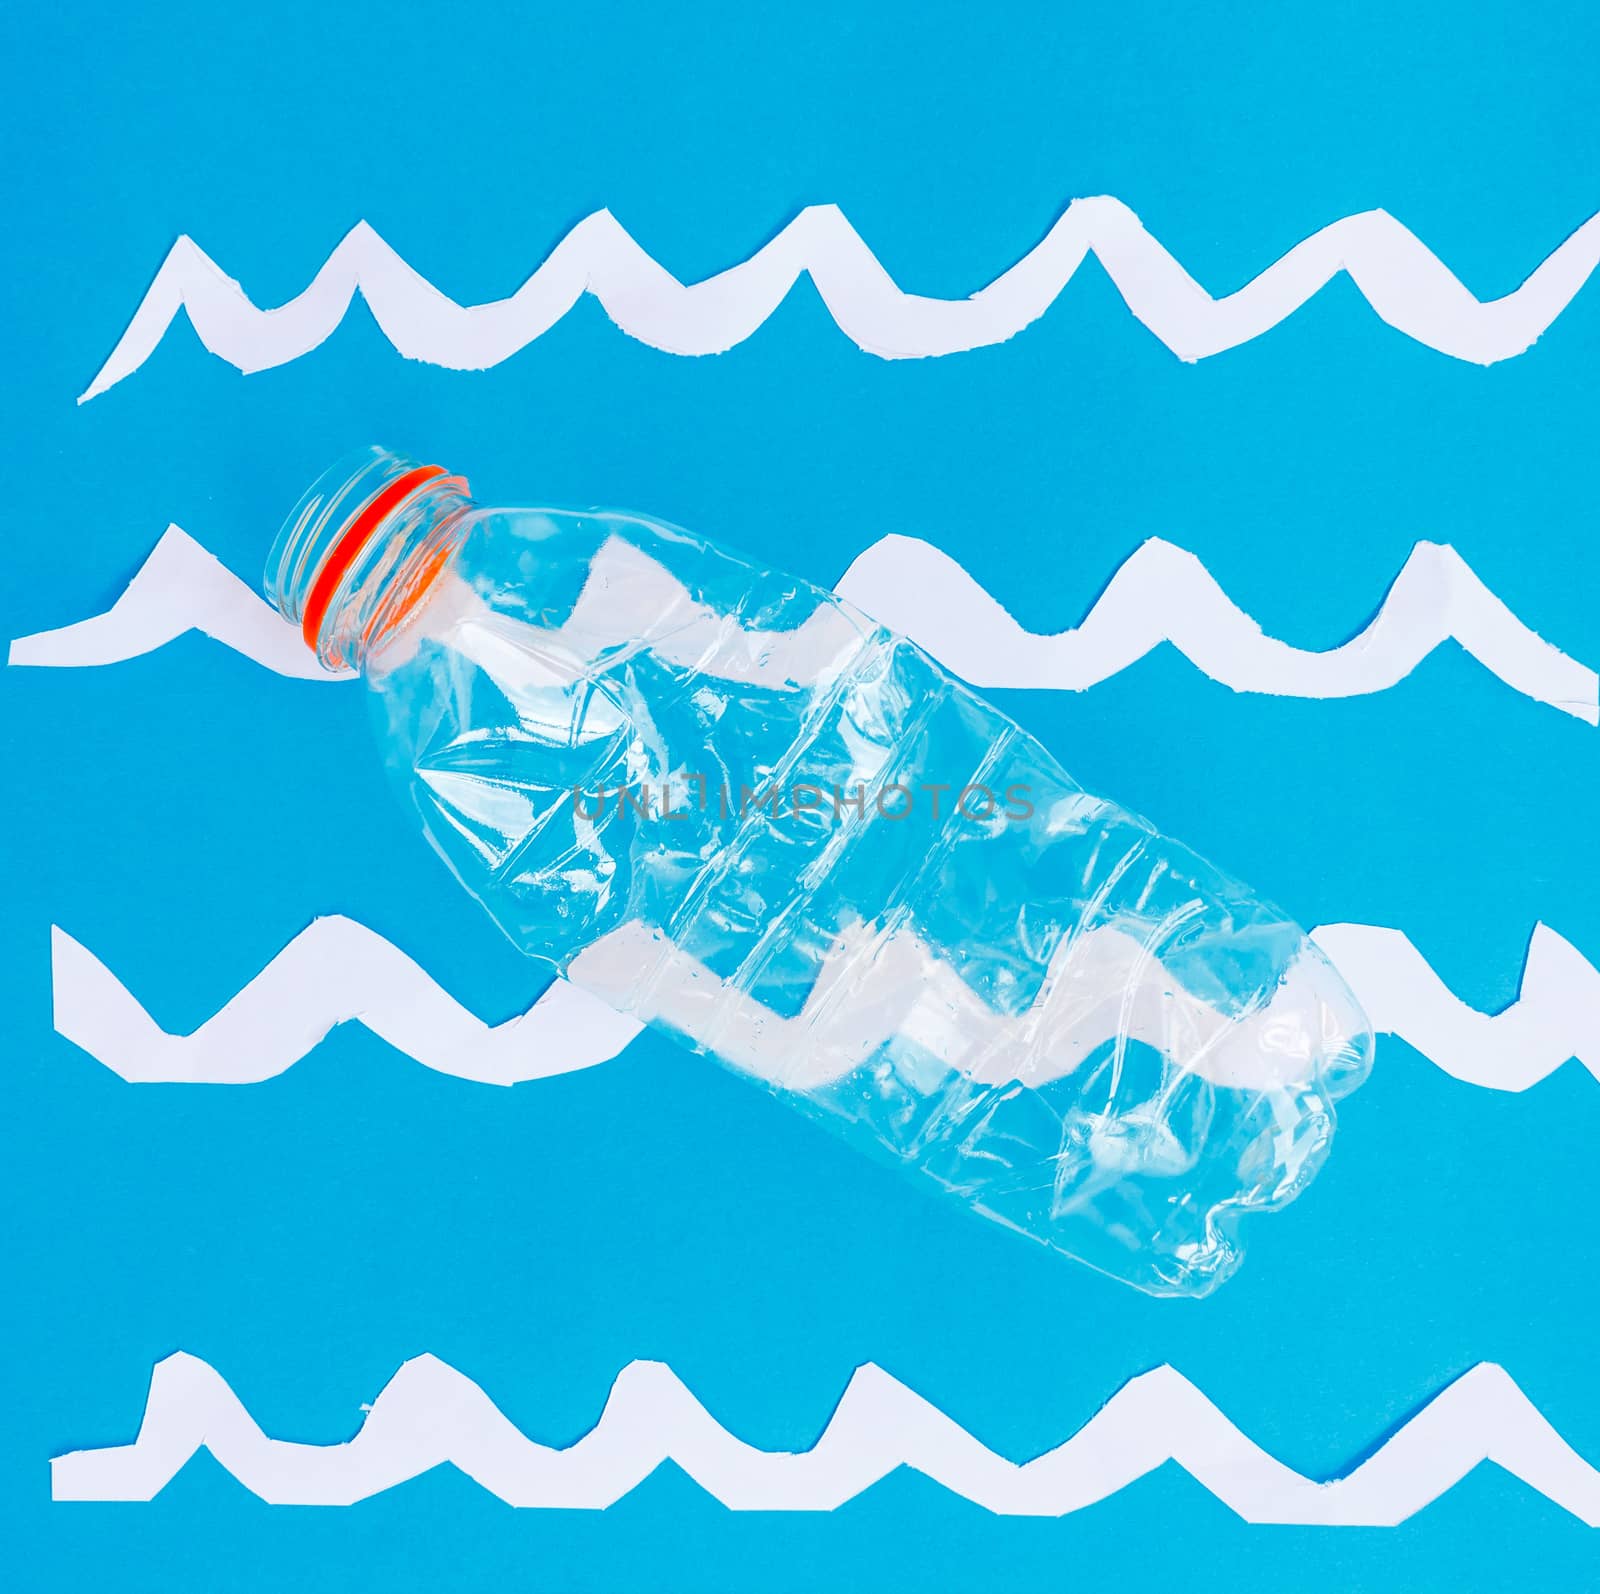 a plastic bottle floats on a surface that represents the sea